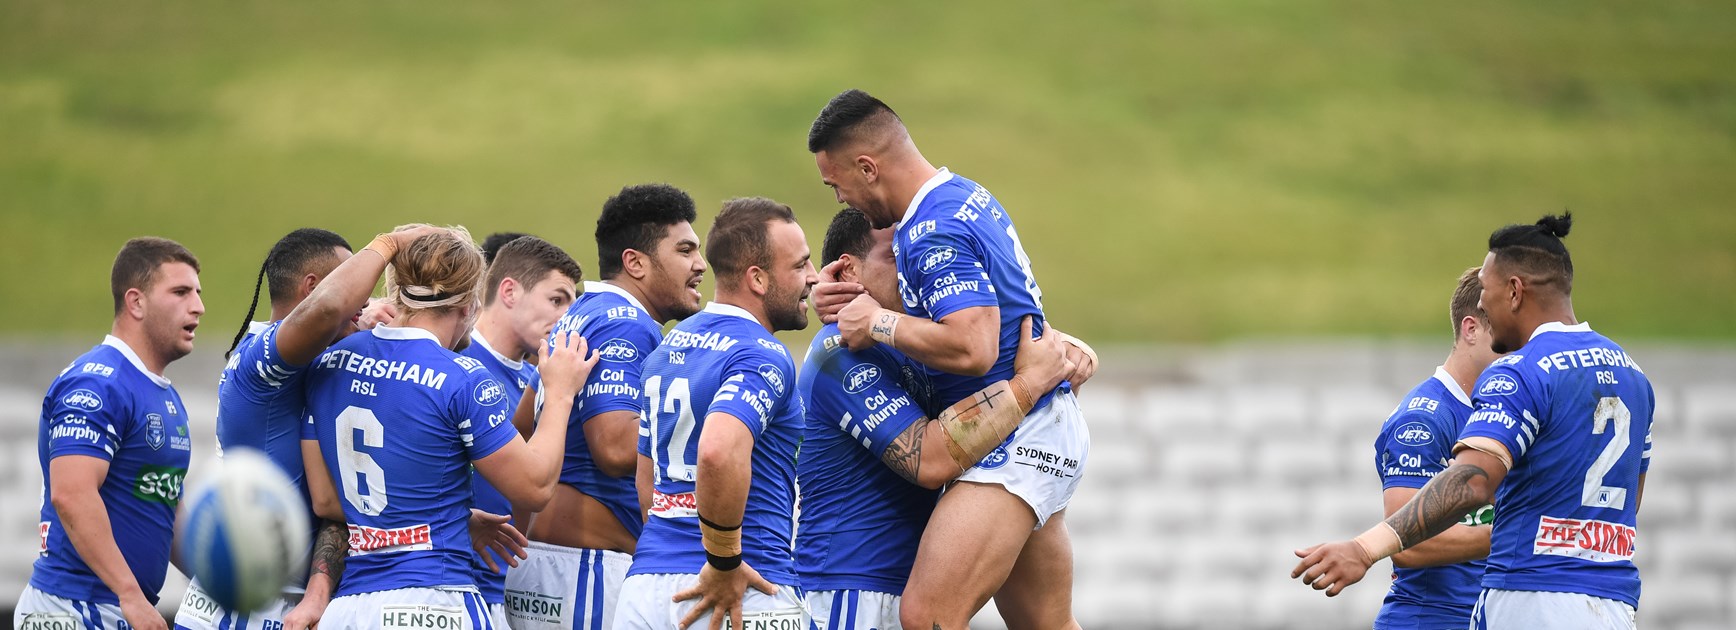 Jets fly into ISP Grand Final